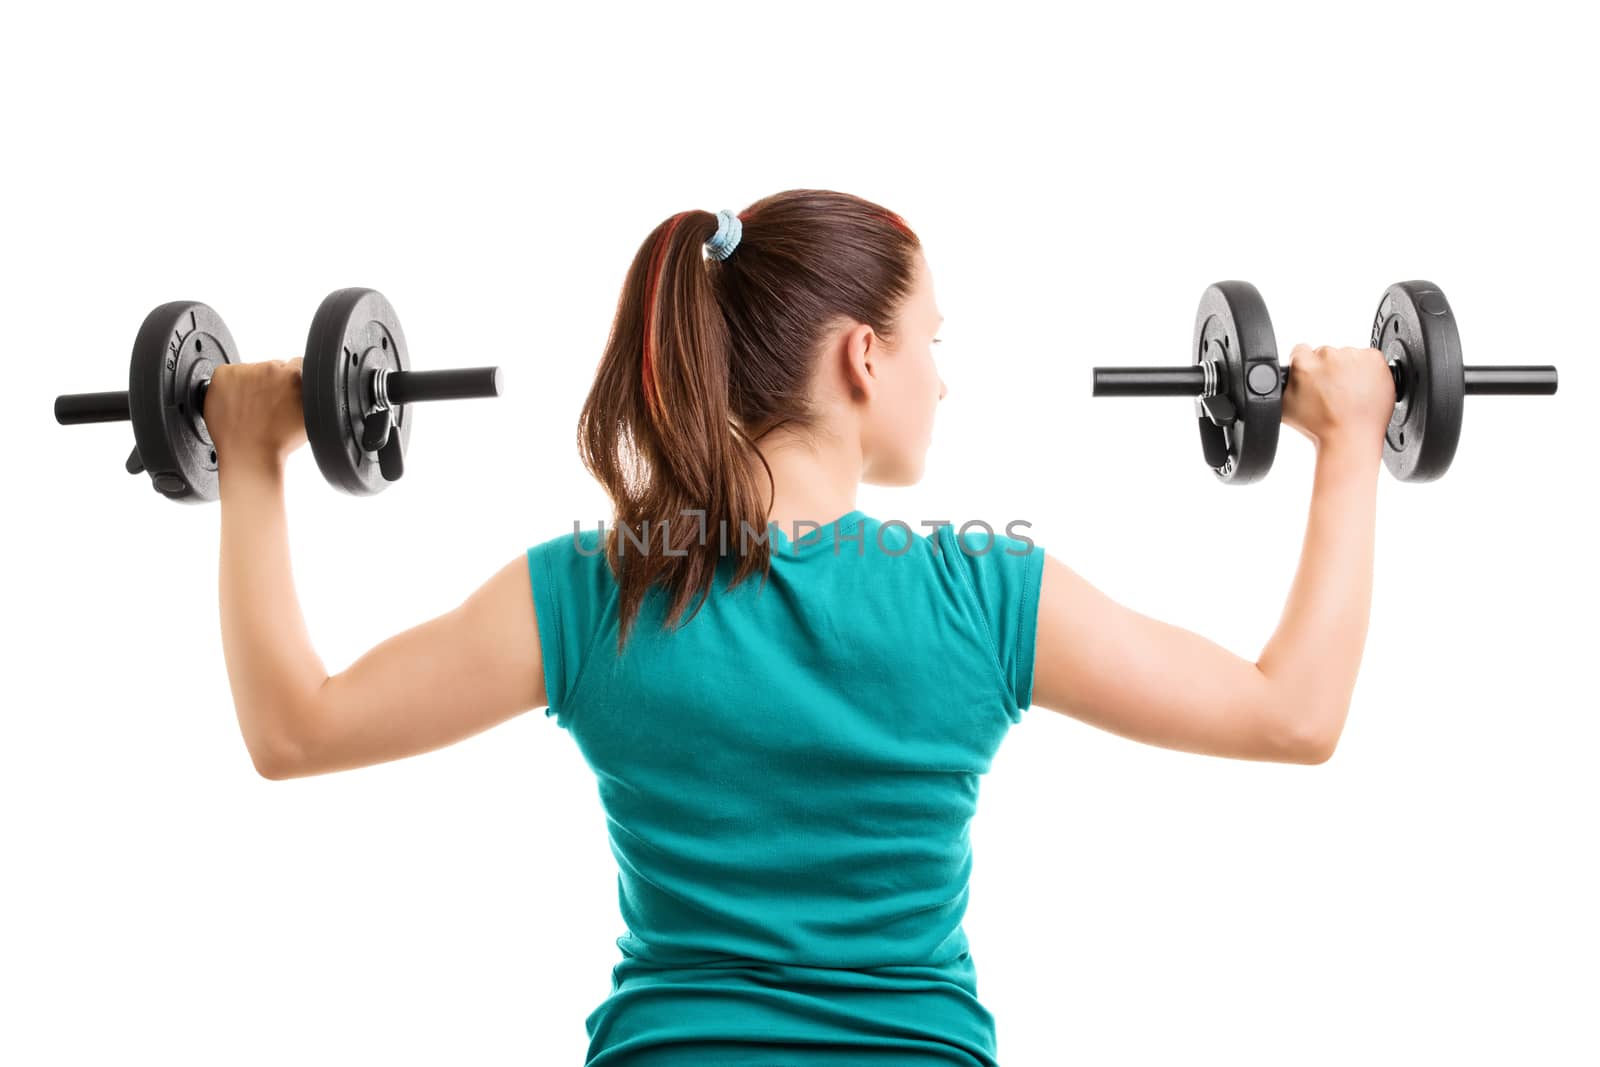 Fit young woman doing shoulder raises with dumbbells, isolated on white background.